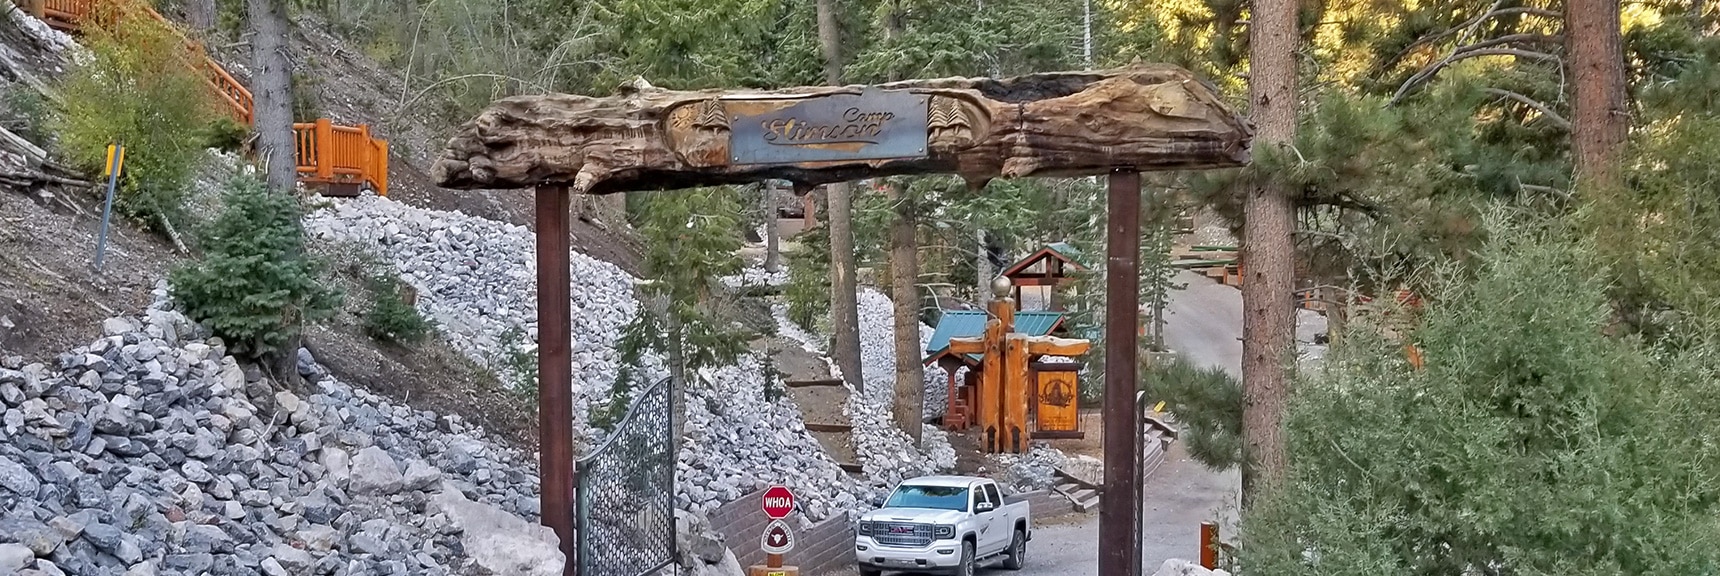 Entrance to Camp Stimpson, LDS Youth Camp | Mummy Mountain's Head, Mt Charleston Wilderness, Spring Mountains, Nevada 007